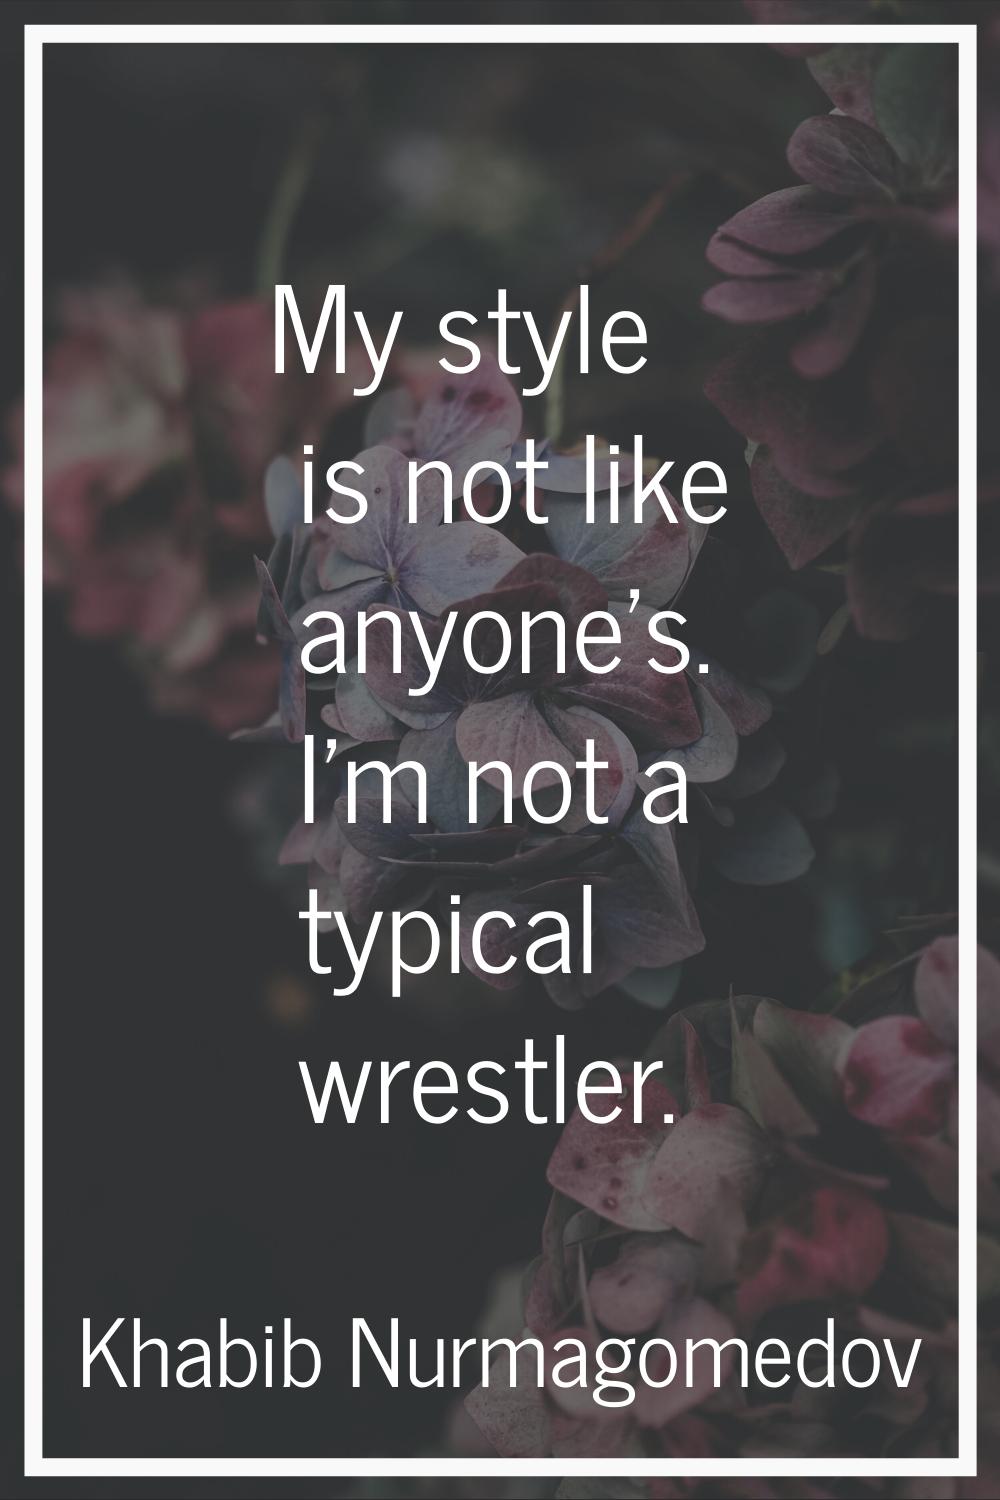 My style is not like anyone's. I'm not a typical wrestler.